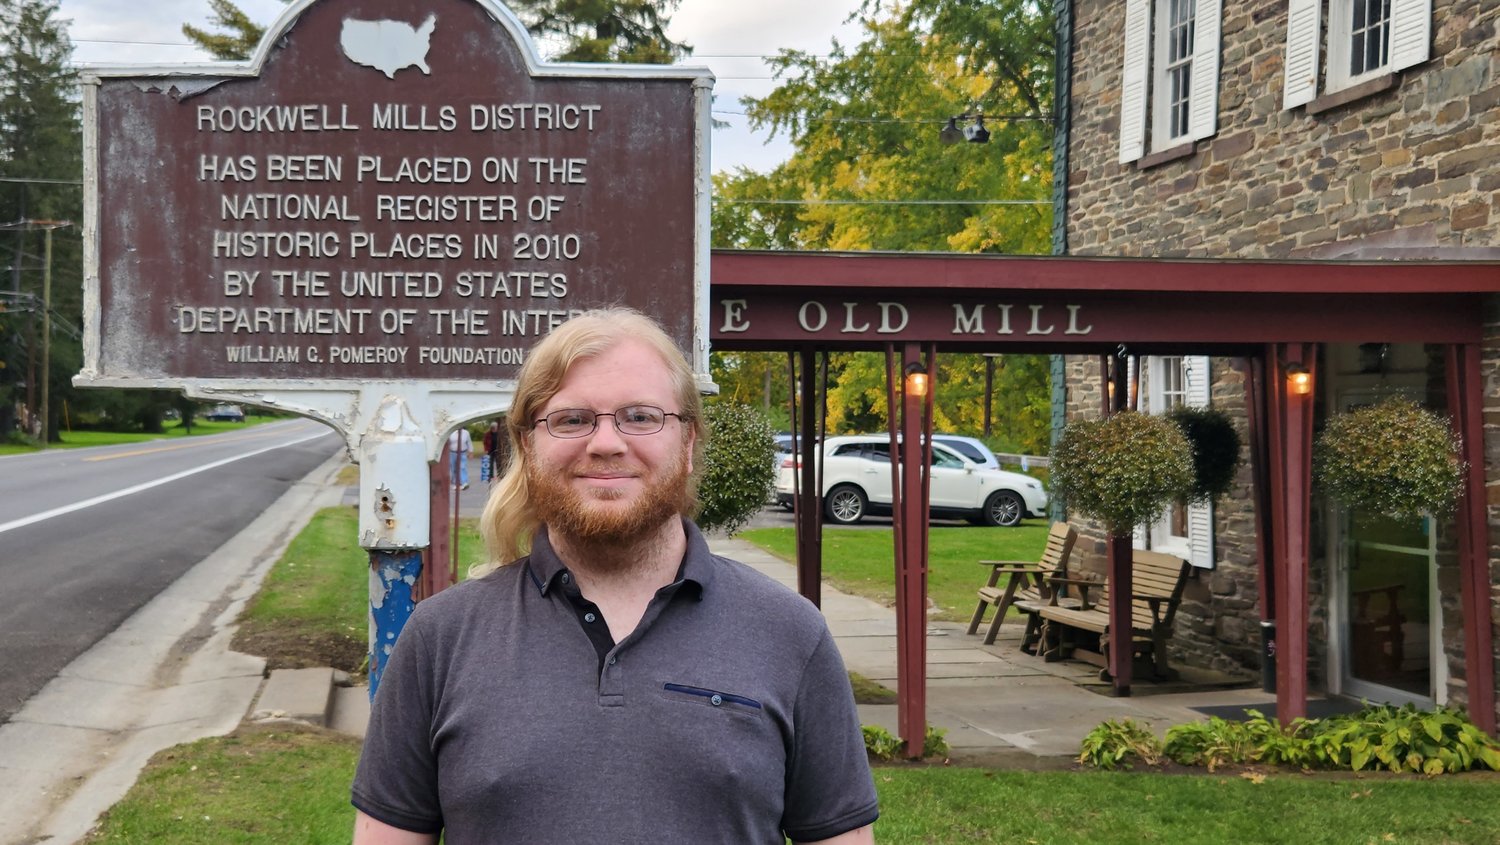 Zachary Greenfield, newly appointed Chenango County Historical Society archives and collections coordinator, visits regional landmark The Old Mill, located in the town of Guilford’s Rockwell Mills District.